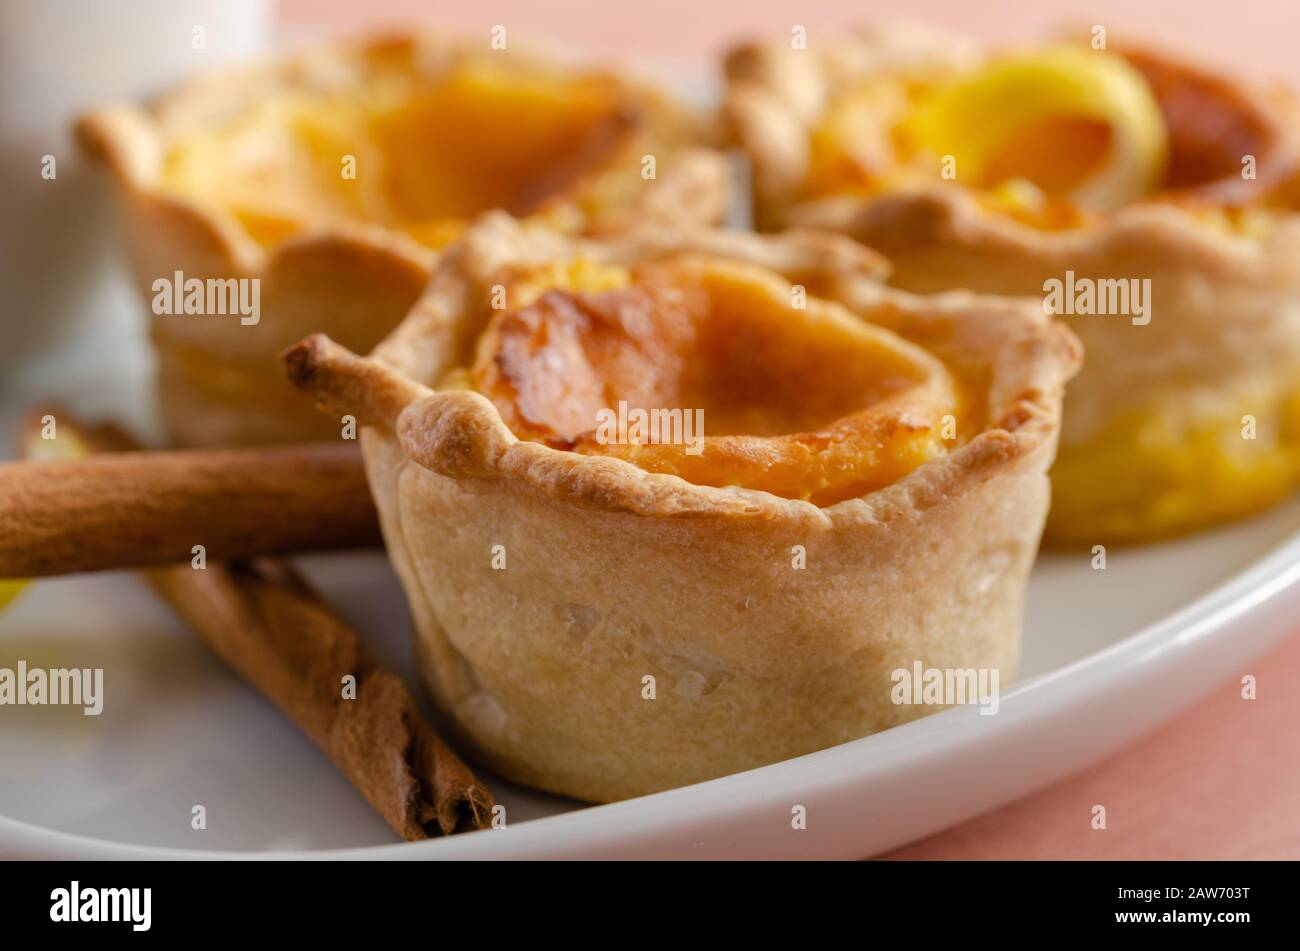 Portuguese egg tart pastry Pastel de nata and cup of coffee on the white plate Stock Photo